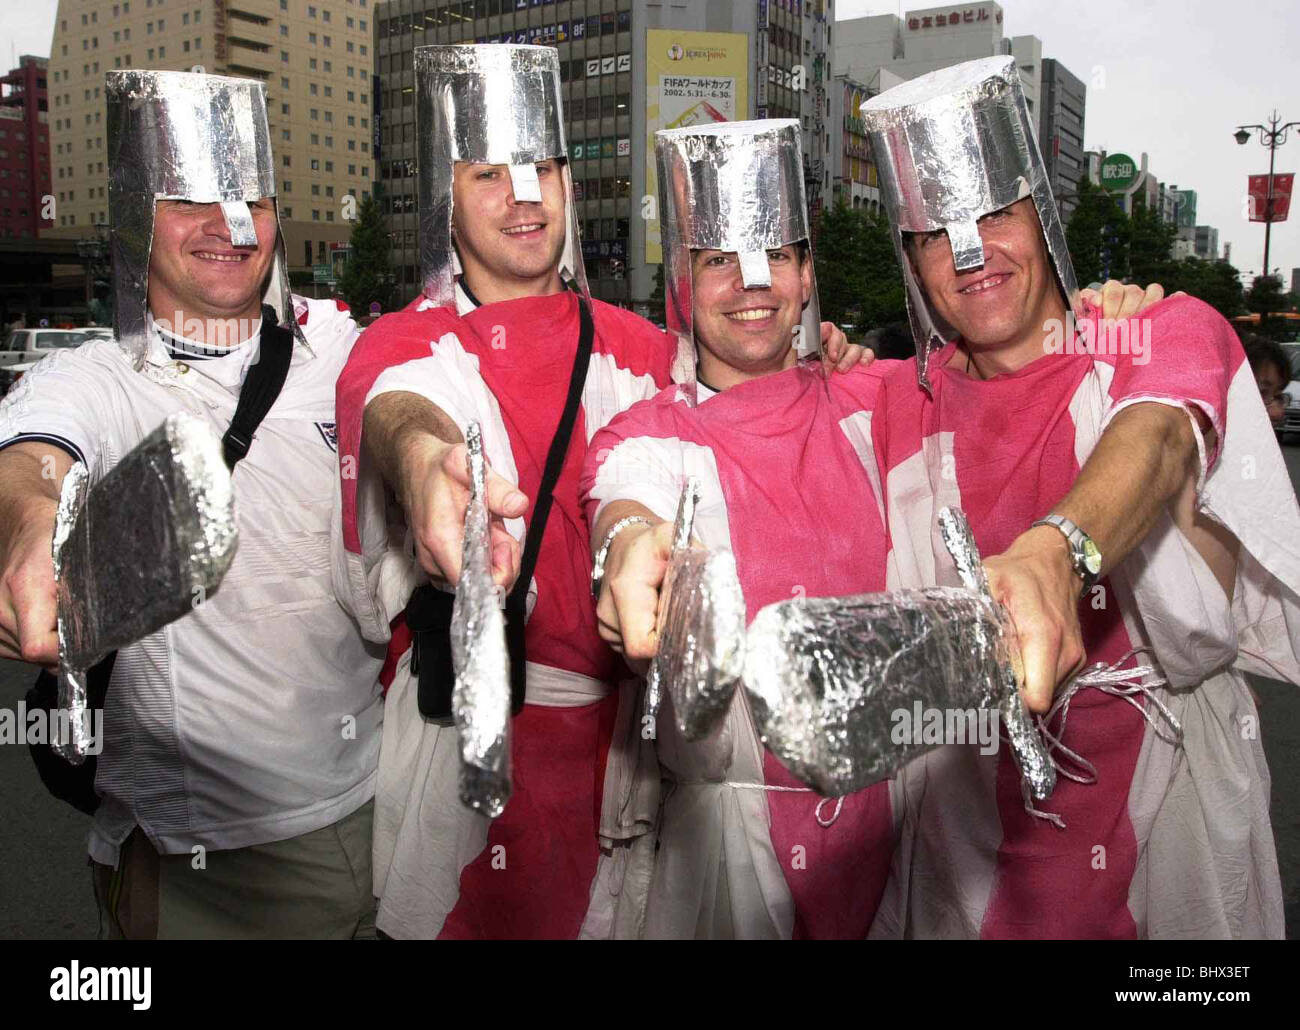 Football Fans Supporters June 2002 Pictured ahead of England v Denmark 2nd Round Match David Cookson, Alex Rigby, Neil Wilson and Chris Moore in Niigata dressed as Norman Soliders with foil helmets and swords Stock Photo